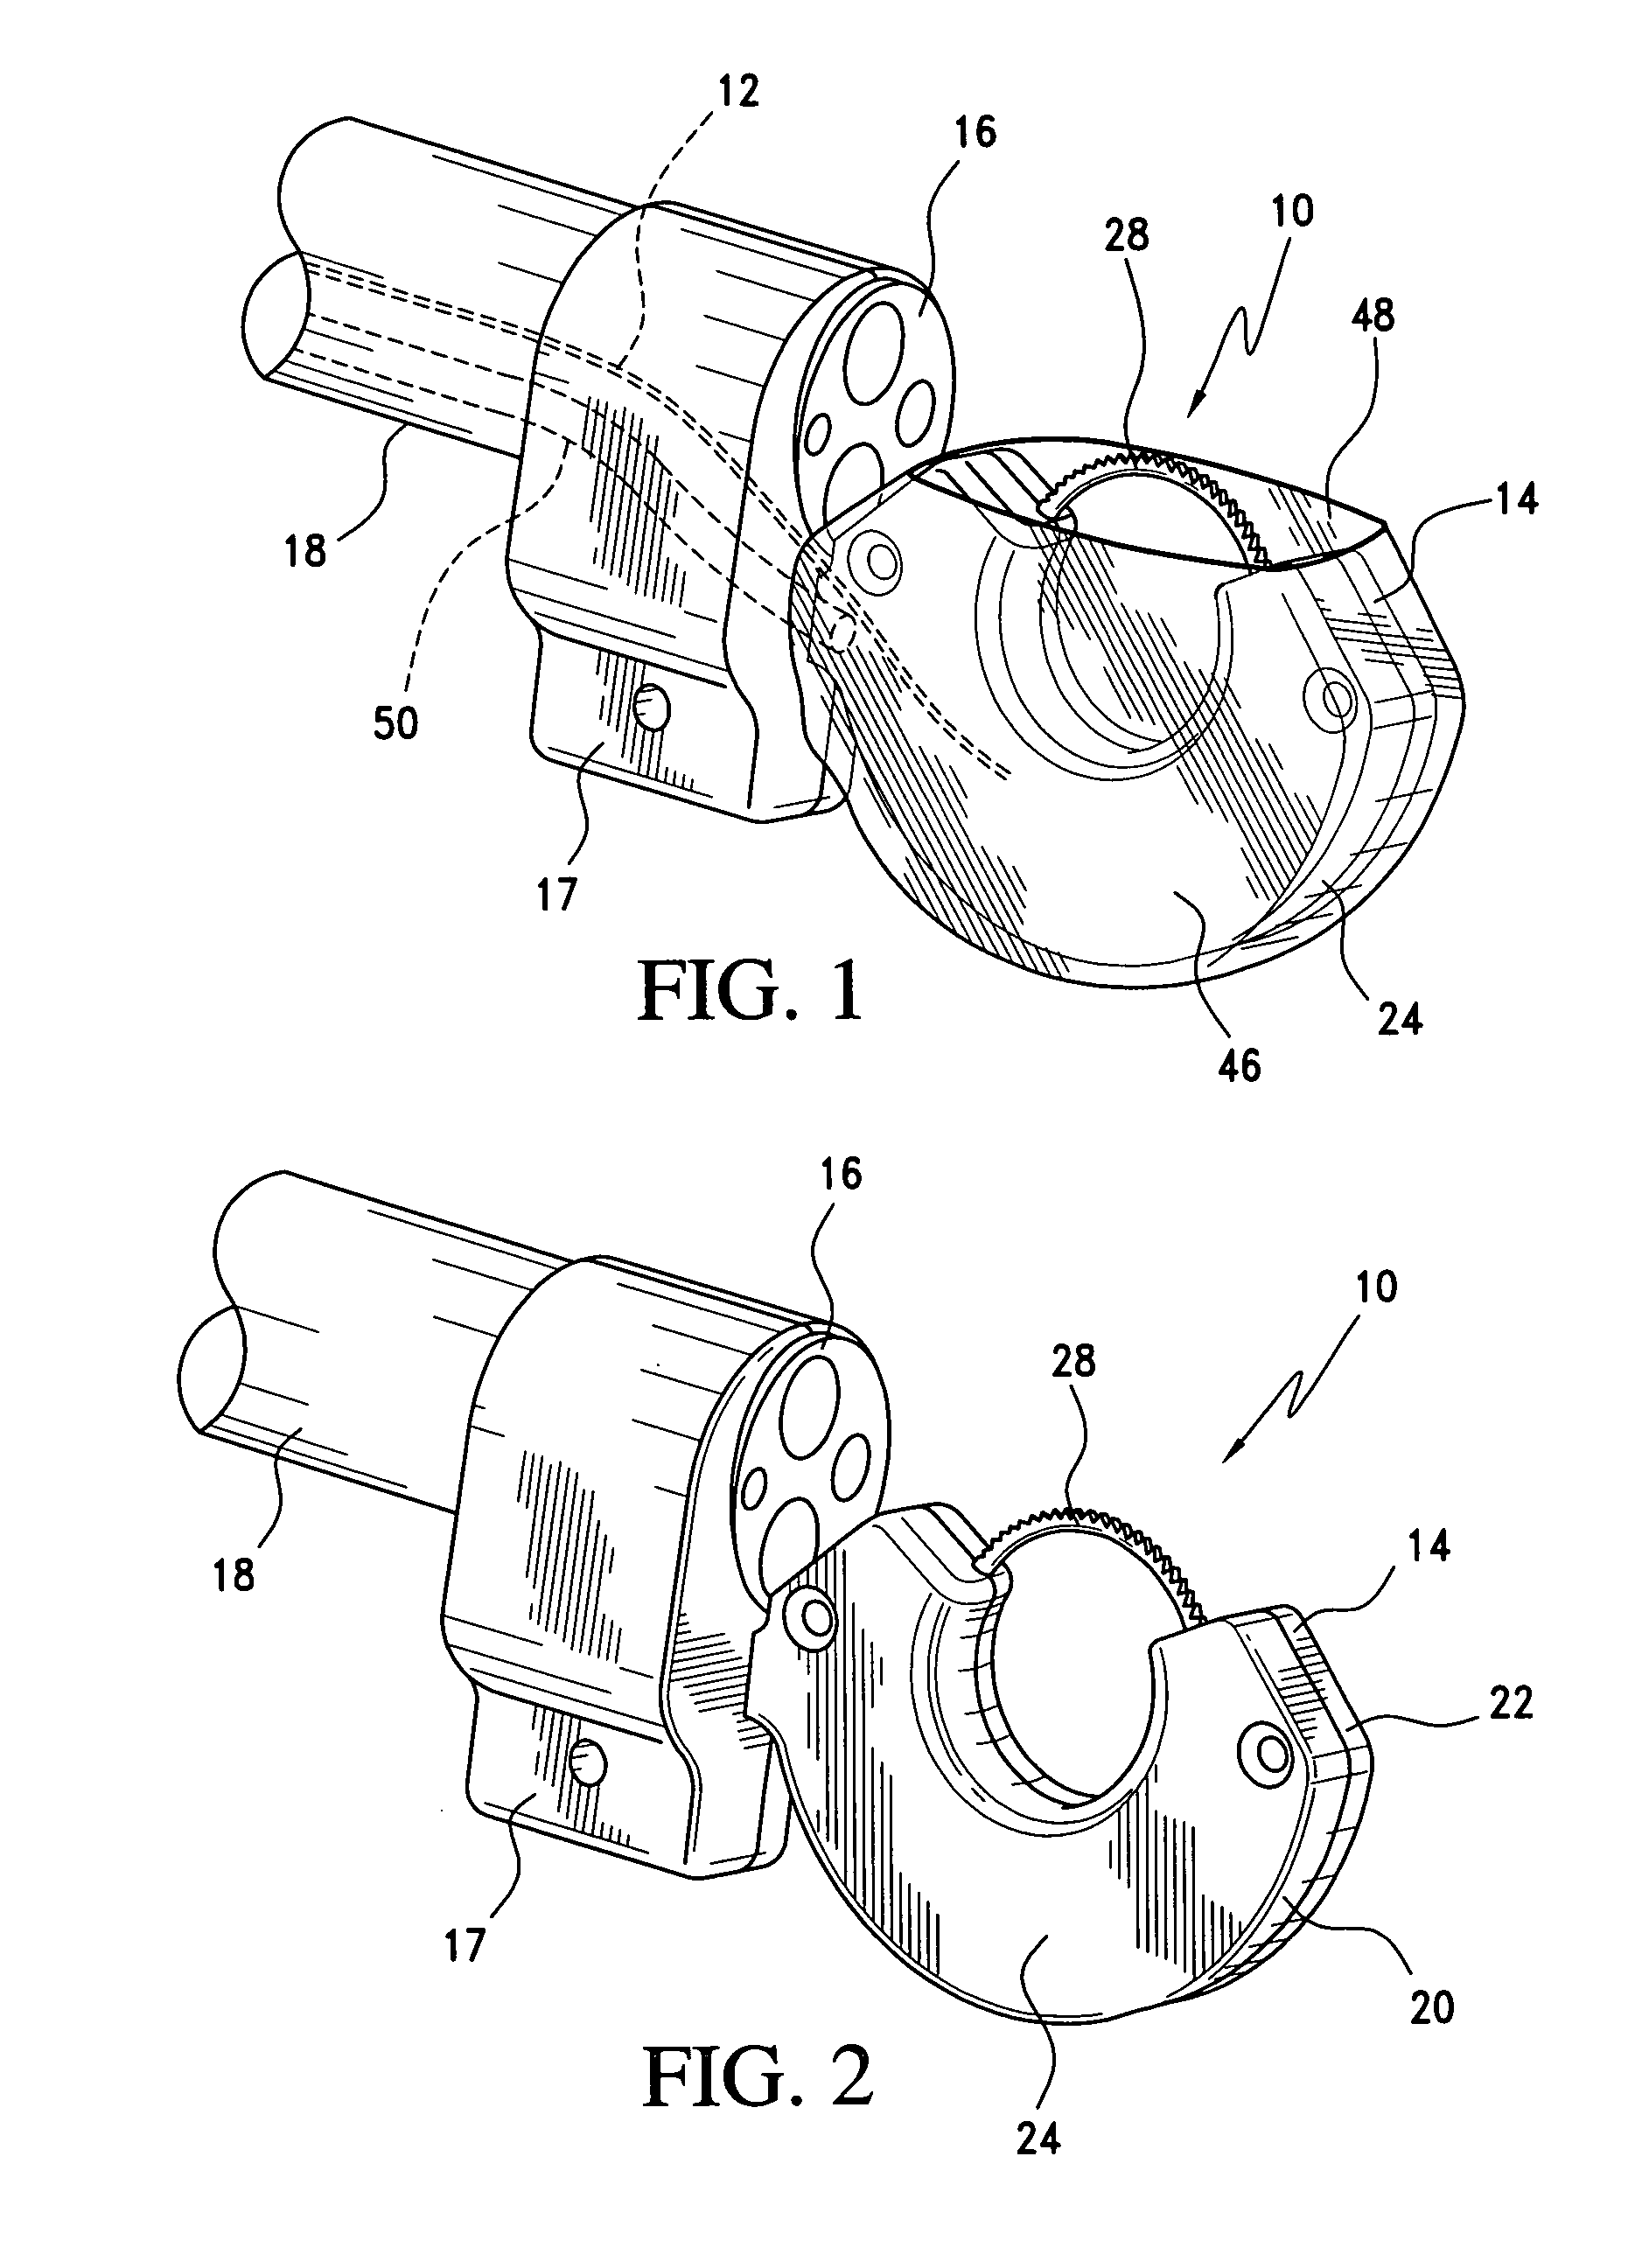 Suture with adhesive/sealant delivery mechanism